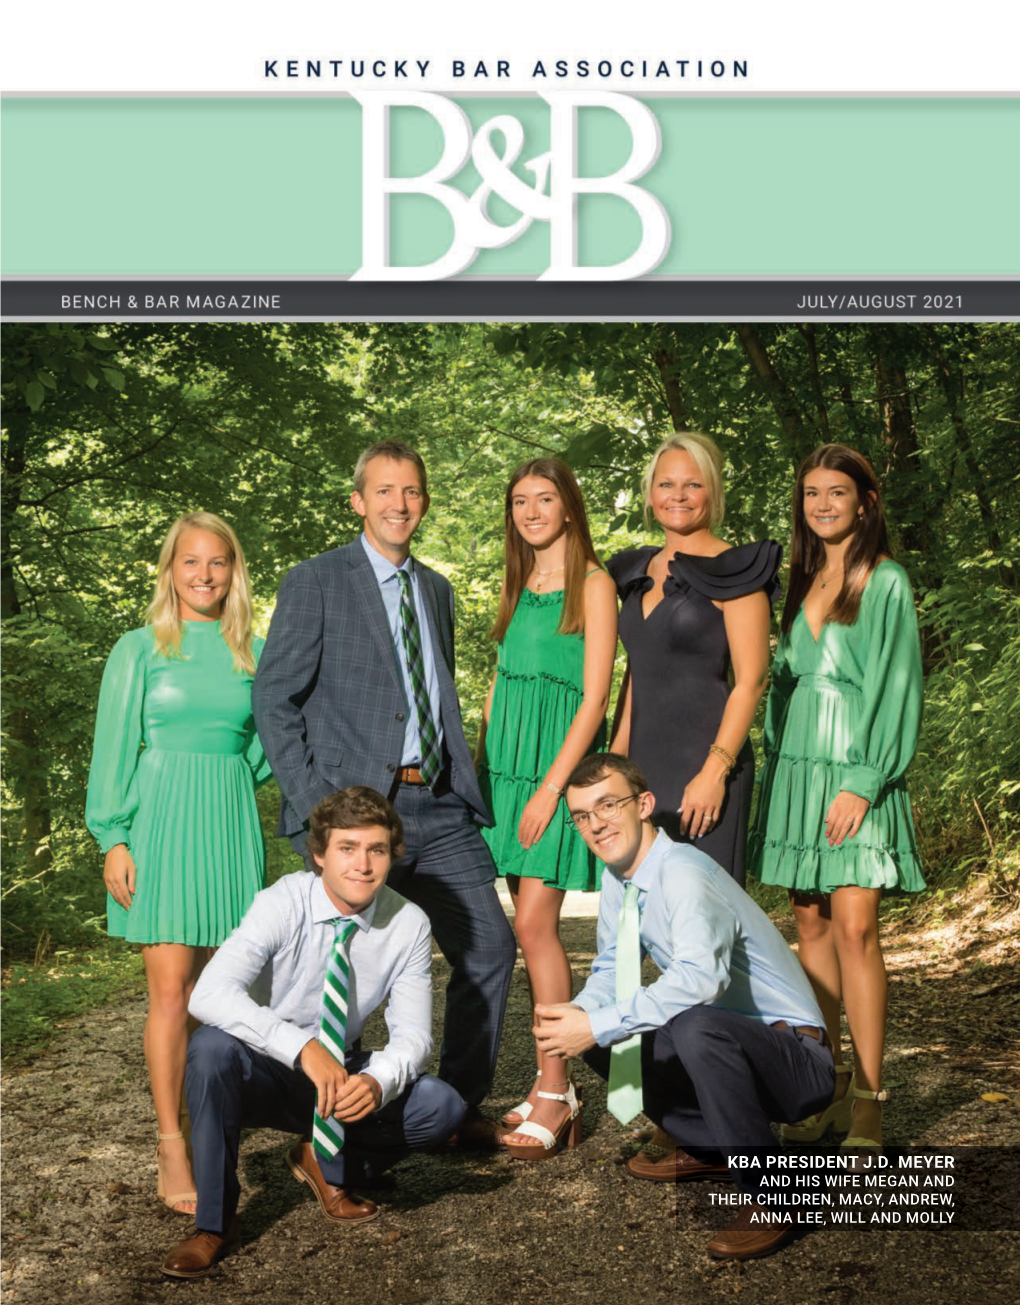 Kba President J.D. Meyer and His Wife Megan and Their Children, Macy, Andrew, Anna Lee, Will and Molly